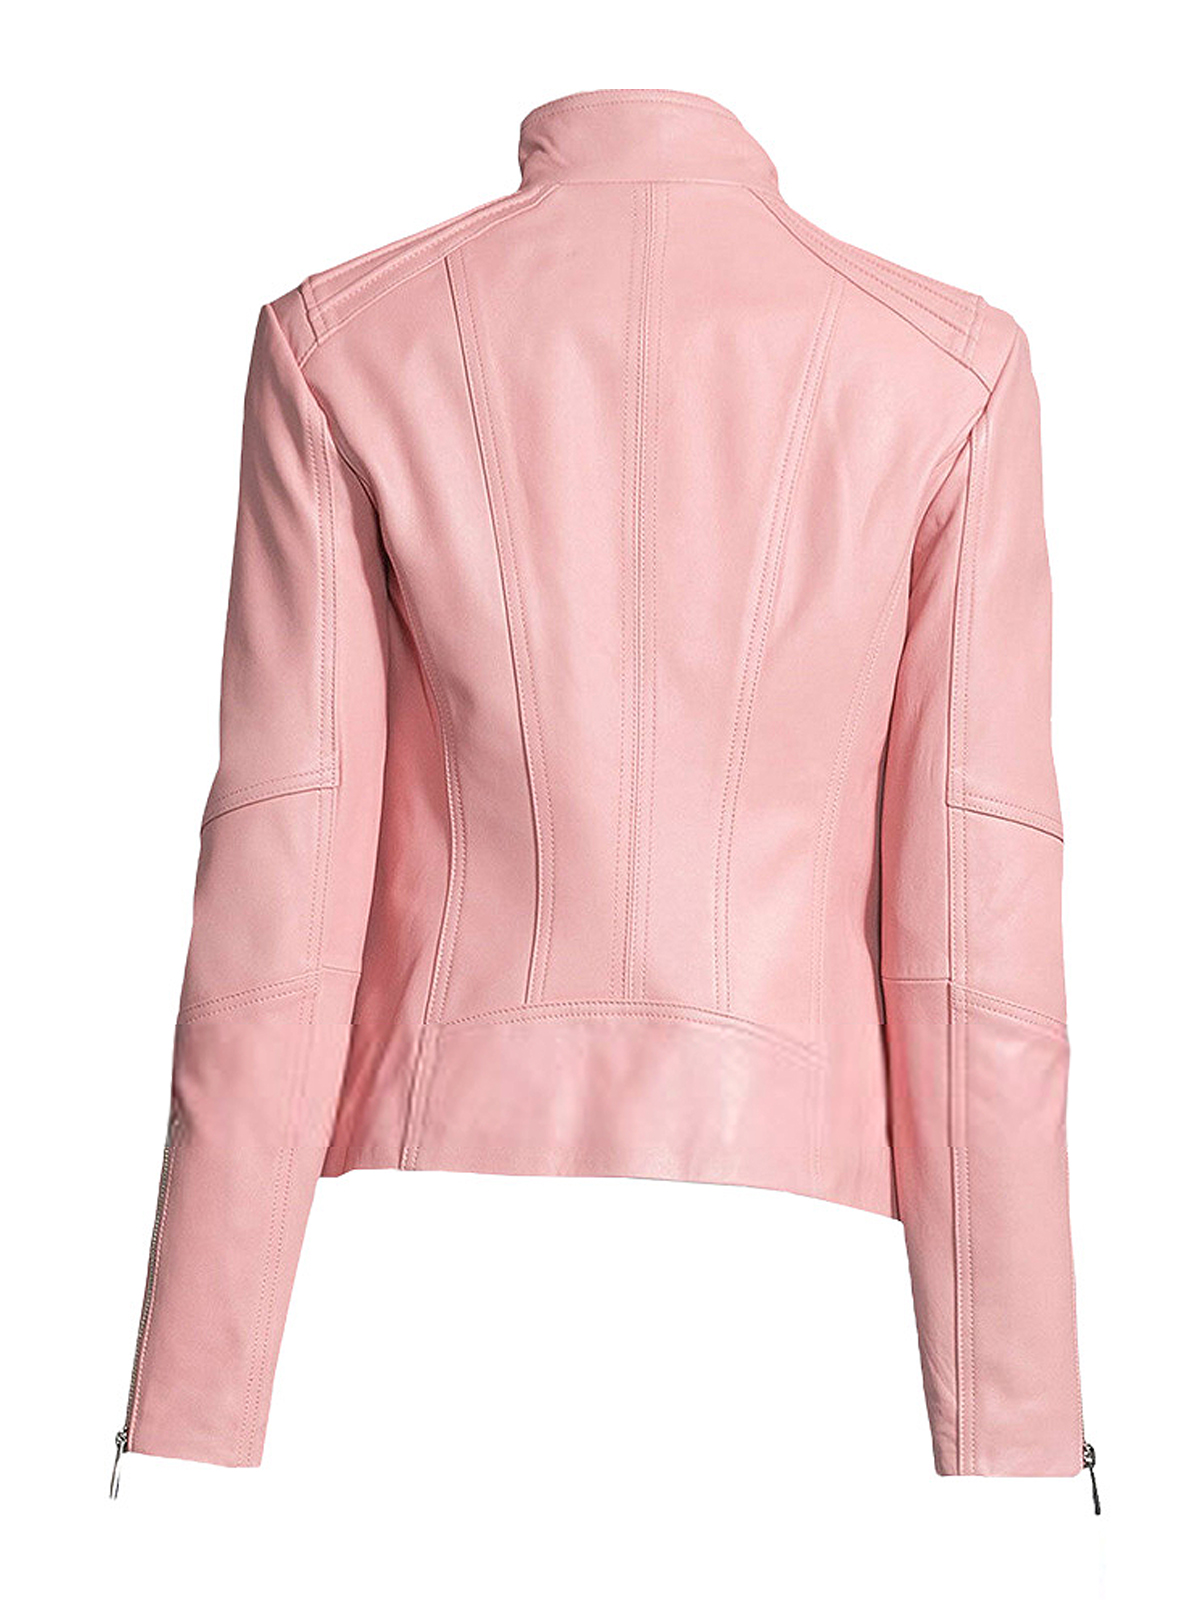 Women’s New Style Casual Pink Leather Jacket